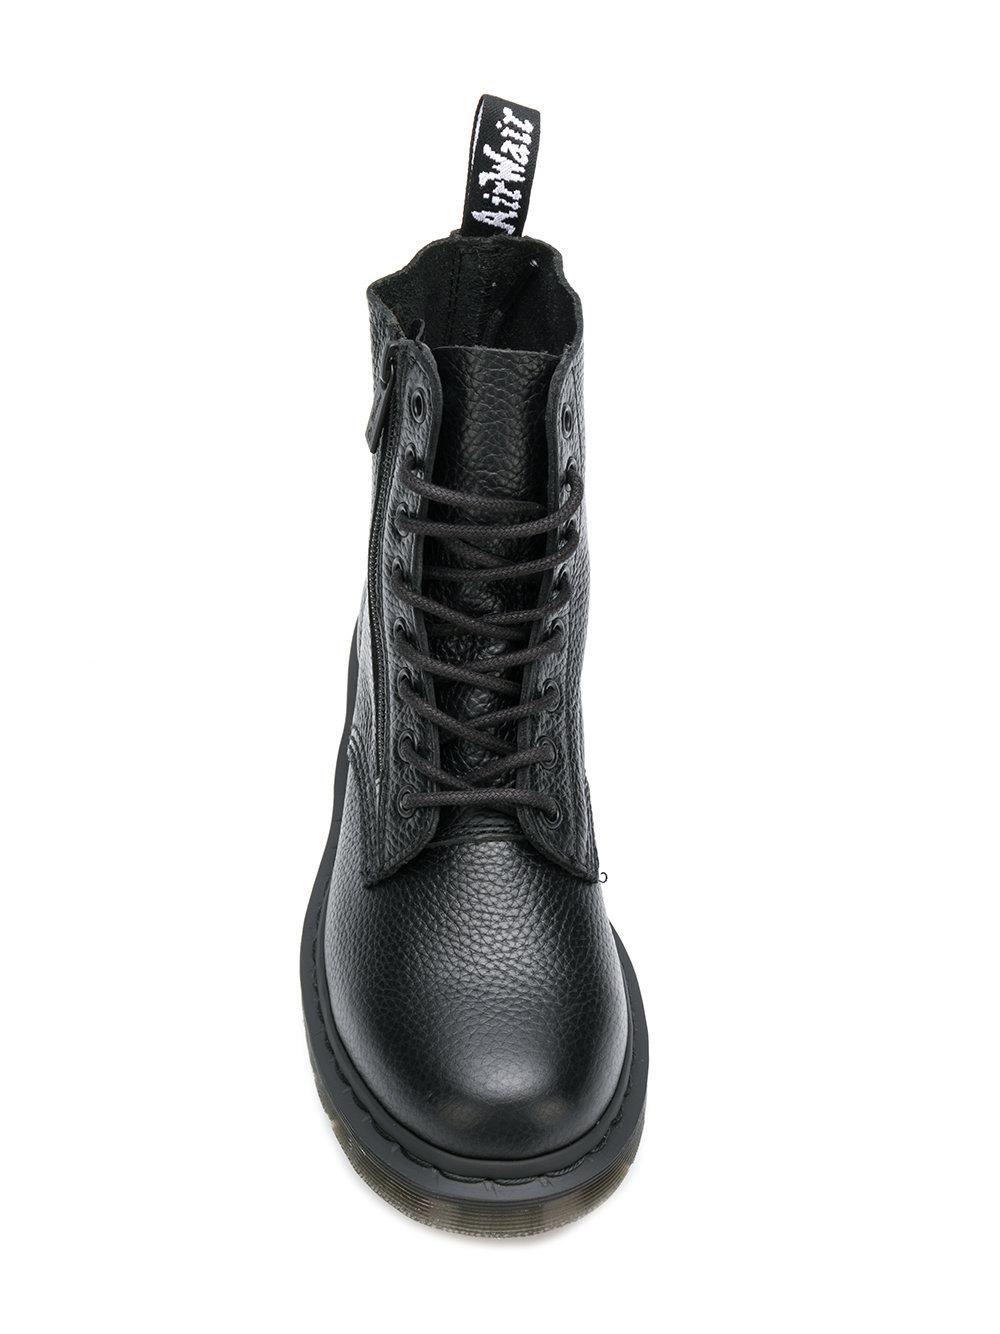 Dr. Martens Leather 1460 Pascal Side Zip Boots in Black - Lyst